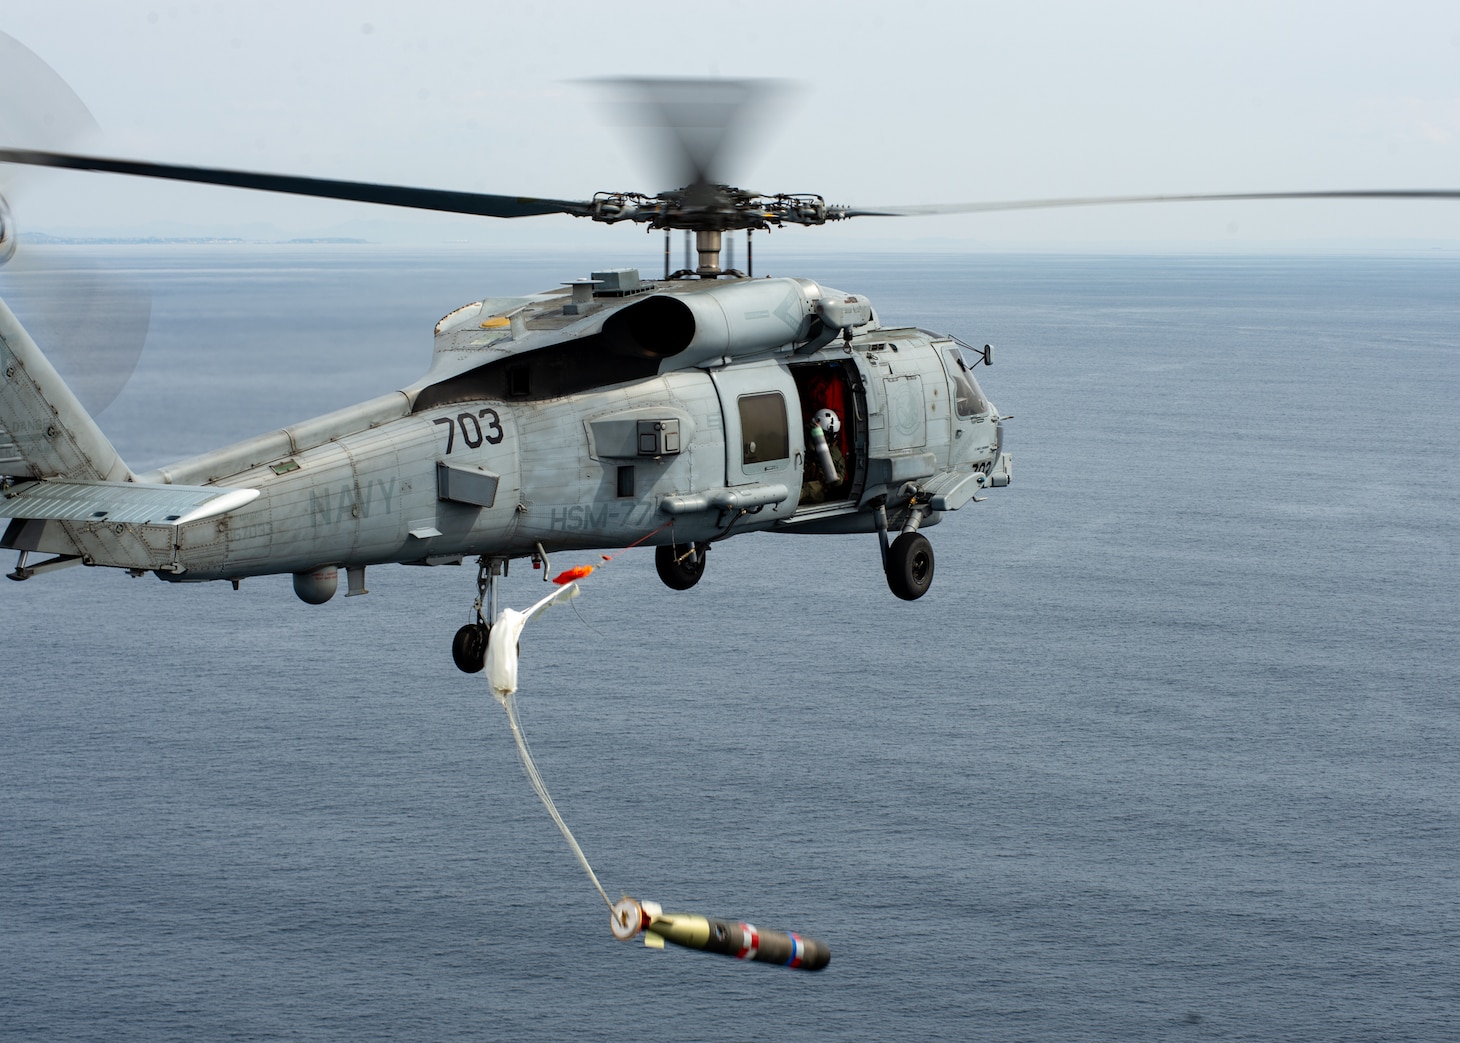 TOKYO BAY (March 10, 2022) An MH-60R Seahawk, attached to the “Saberhawks” of Helicopter Maritime Strike Squadron (HSM) 77, drops a practice torpedo during the first torpedo exercise conducted by a U.S. Navy squadron alongside the JMSDF. HSM-77 is attached to Commander, Task Force 70 and forward-deployed to the U.S. 7th Fleet area of operations in support of a free and open Indo-Pacific. (U.S. Navy photo by Mass Communication Specialist 2nd Class Askia Collins)